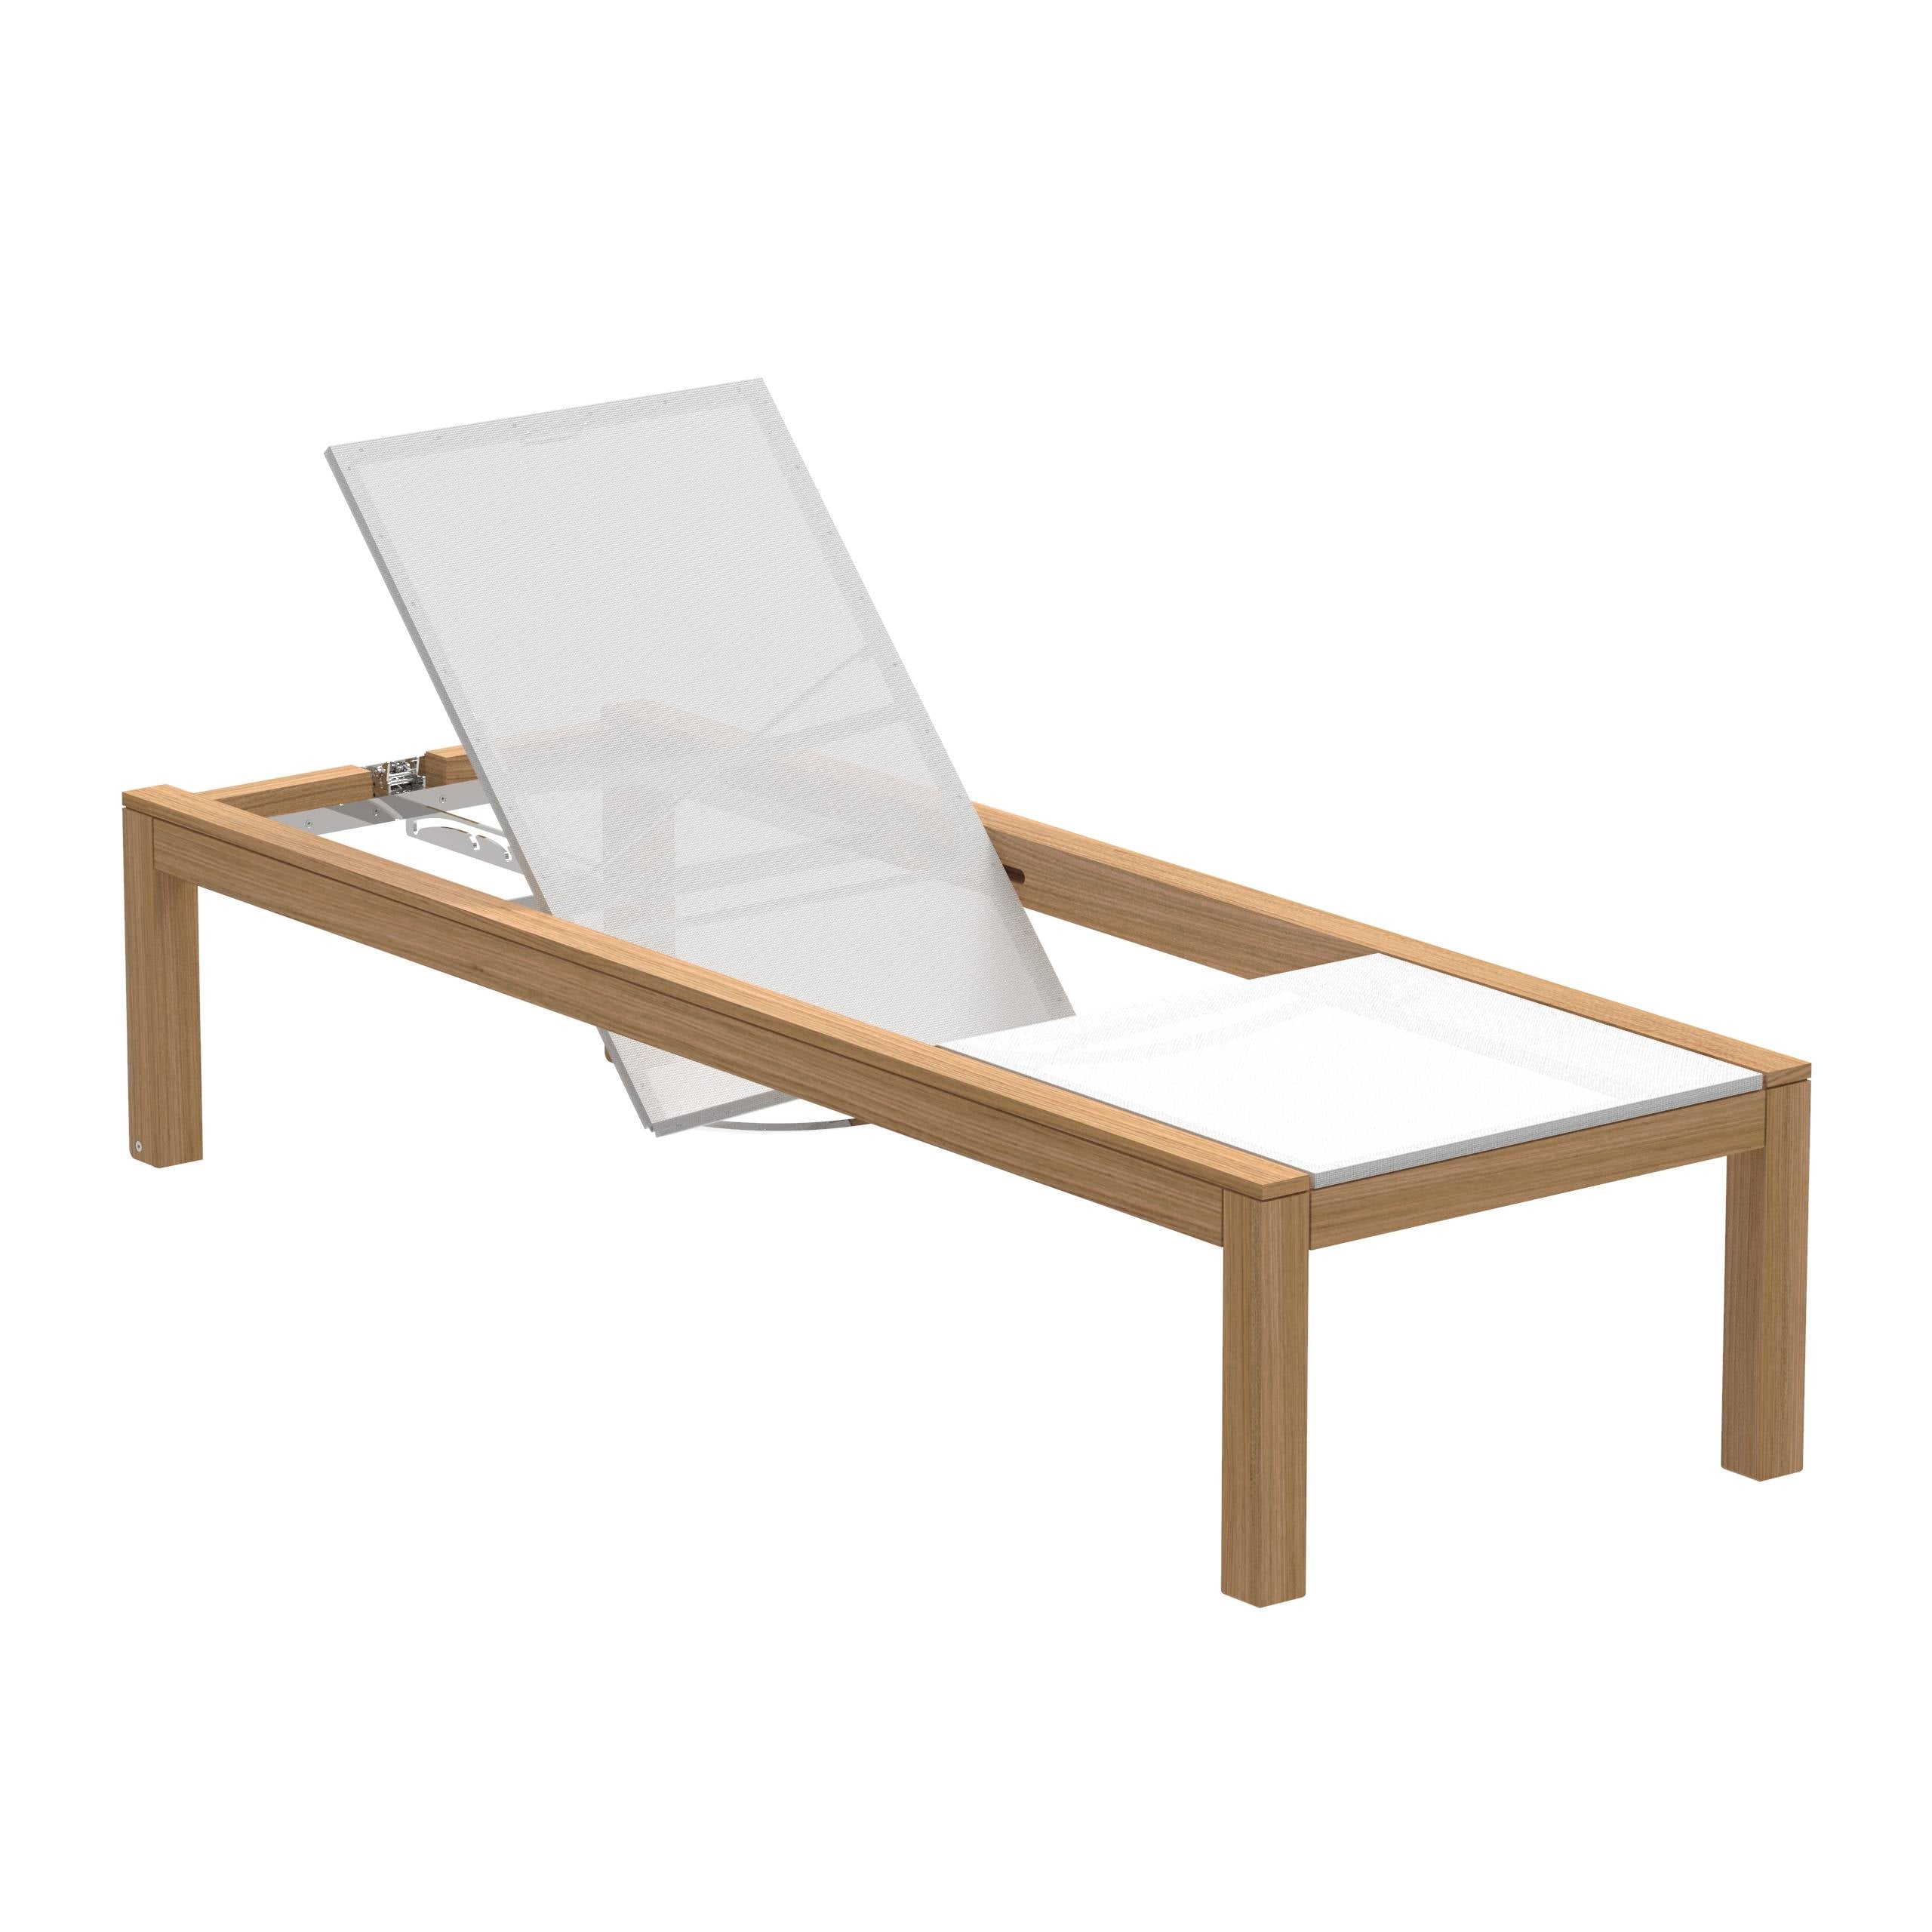 Xqi Reclinable Lounger In Teak With Batyline White